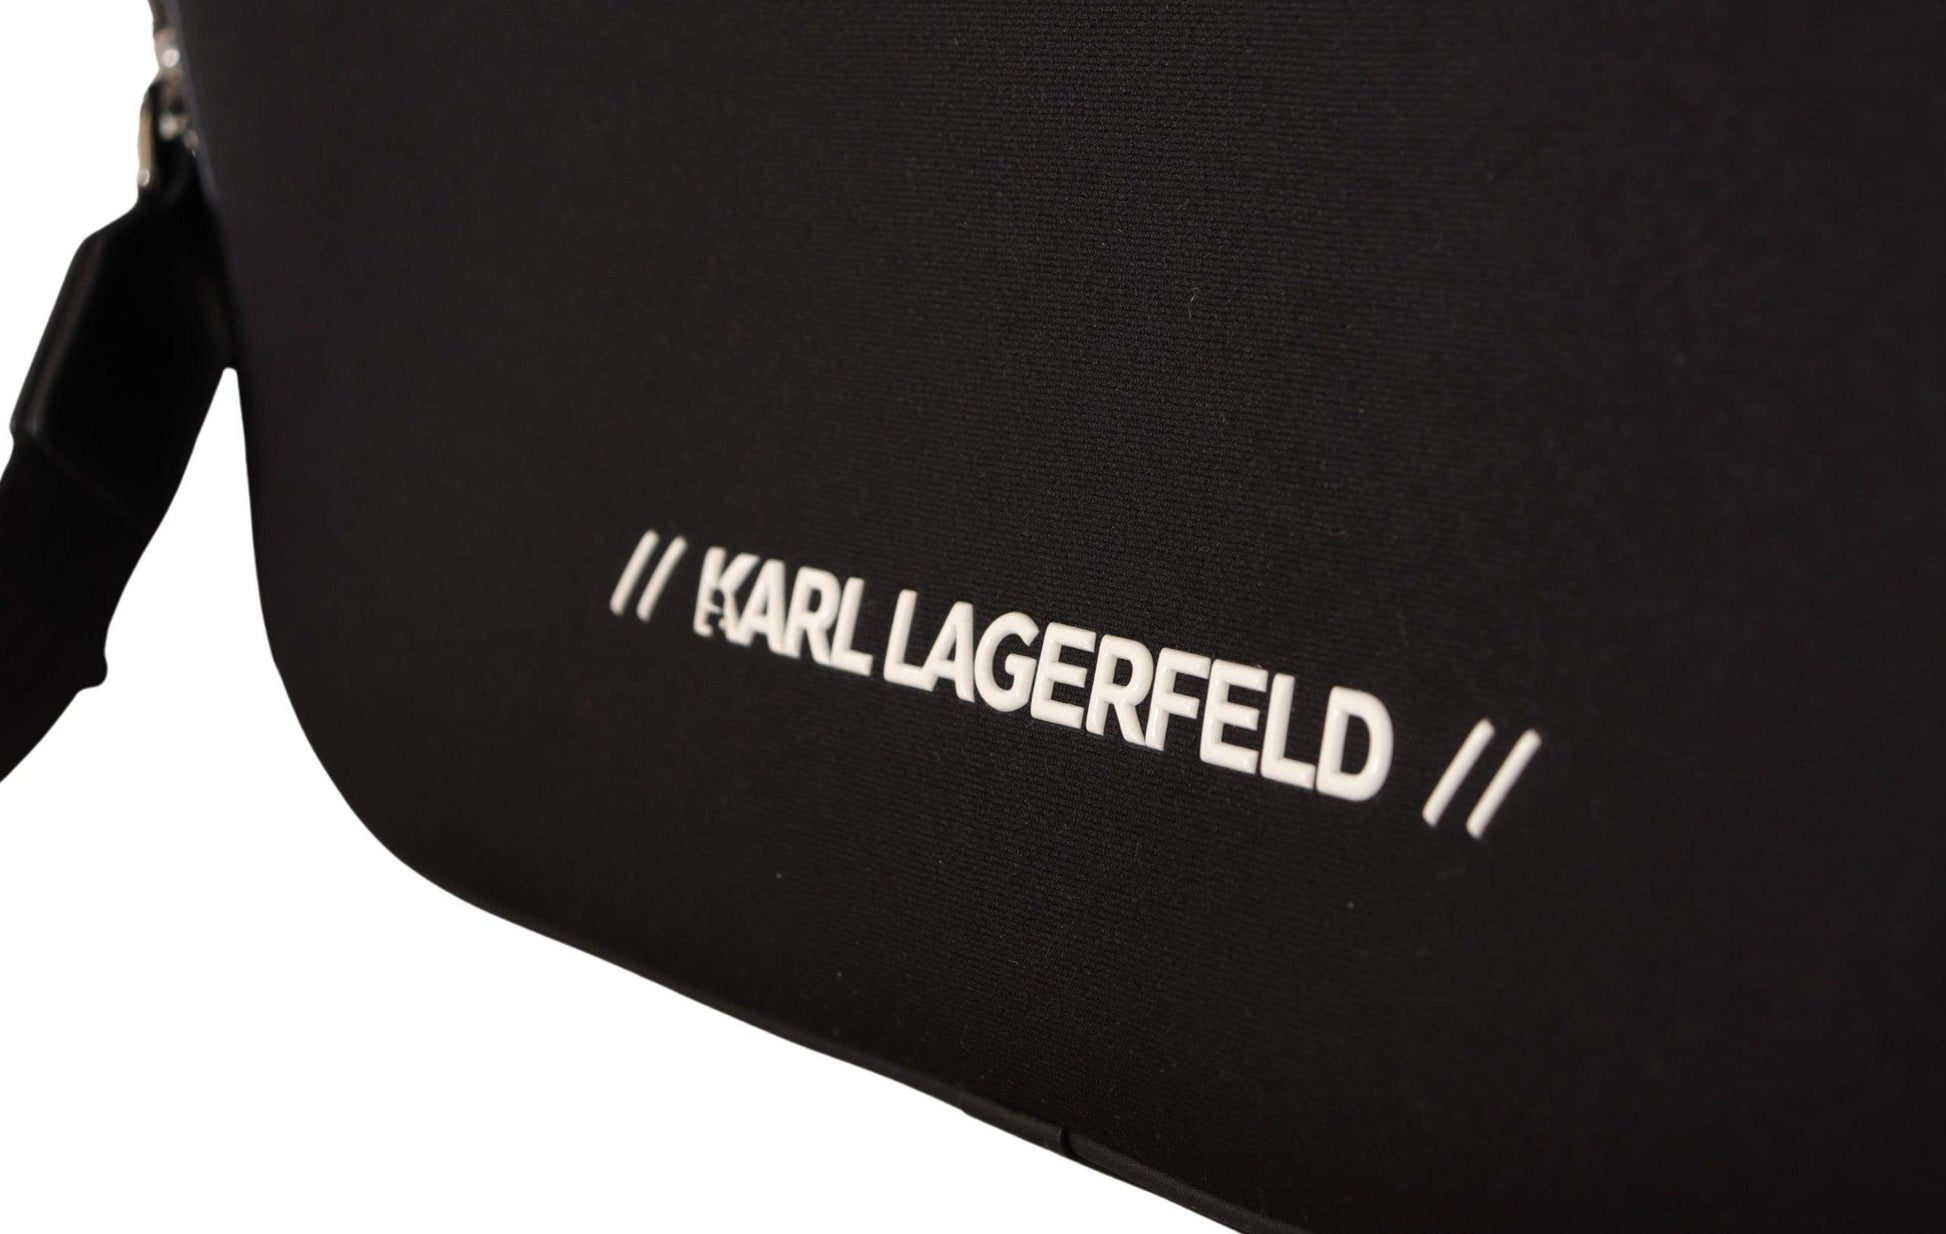 Karl Lagerfeld Black Nylon Laptop Crossbody Bag - Designed by Karl Lagerfeld Available to Buy at a Discounted Price on Moon Behind The Hill Online Designer Discount Store